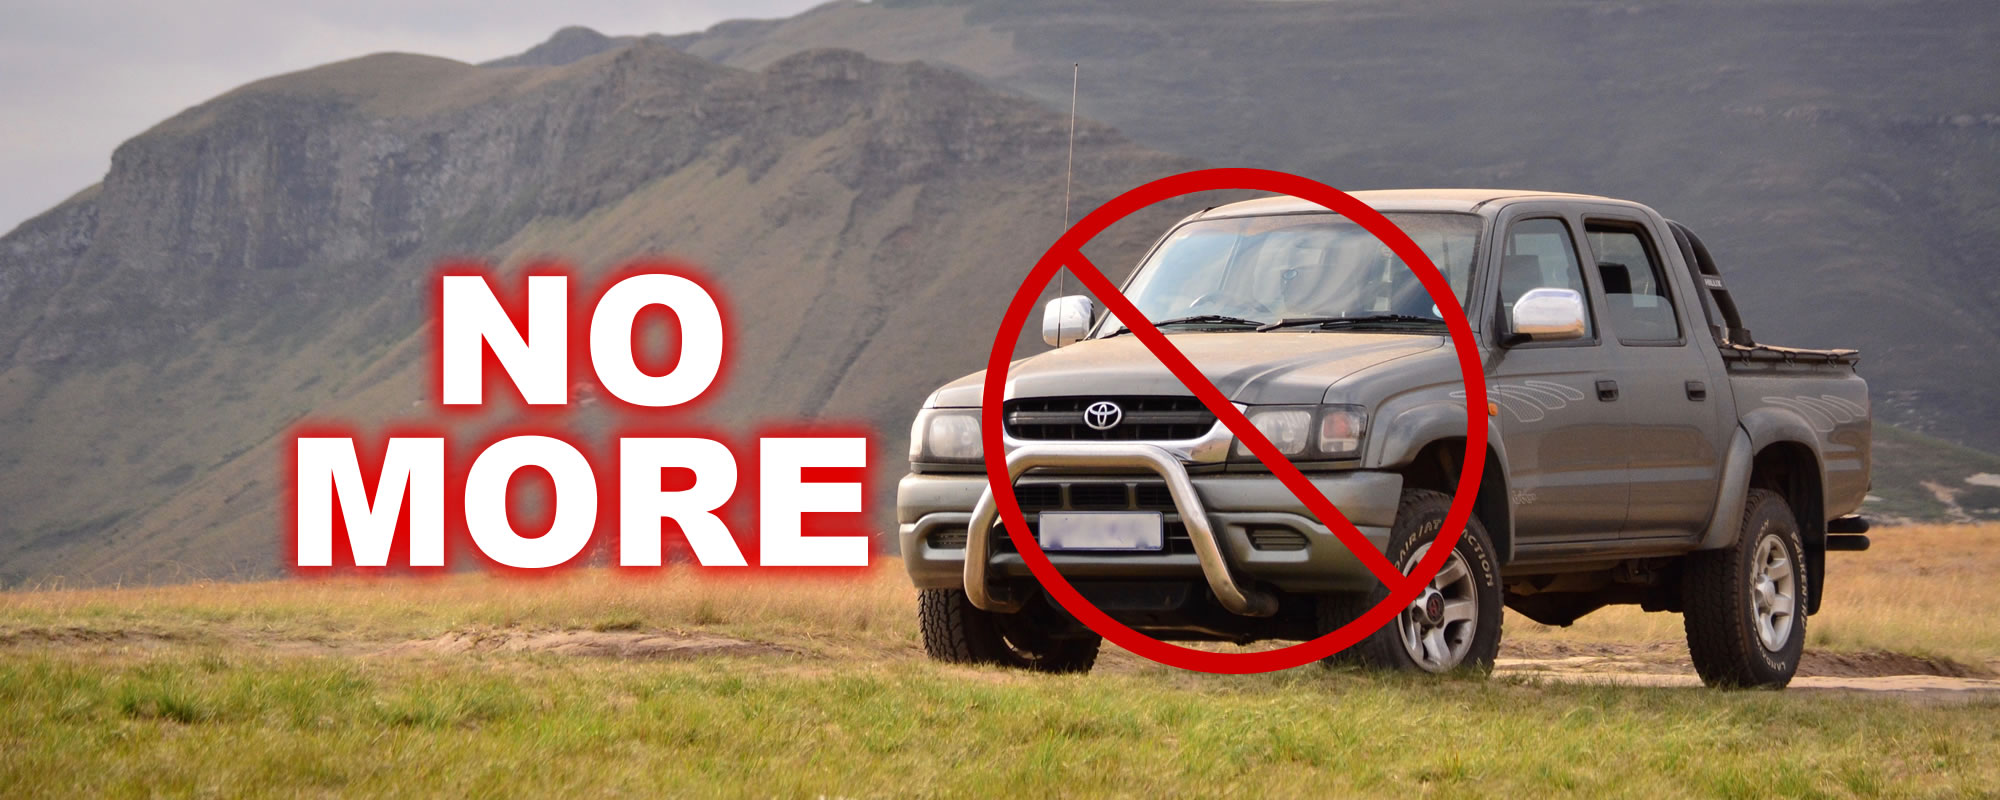 Toyota announces “No more 4WD’s” starting from July 2020